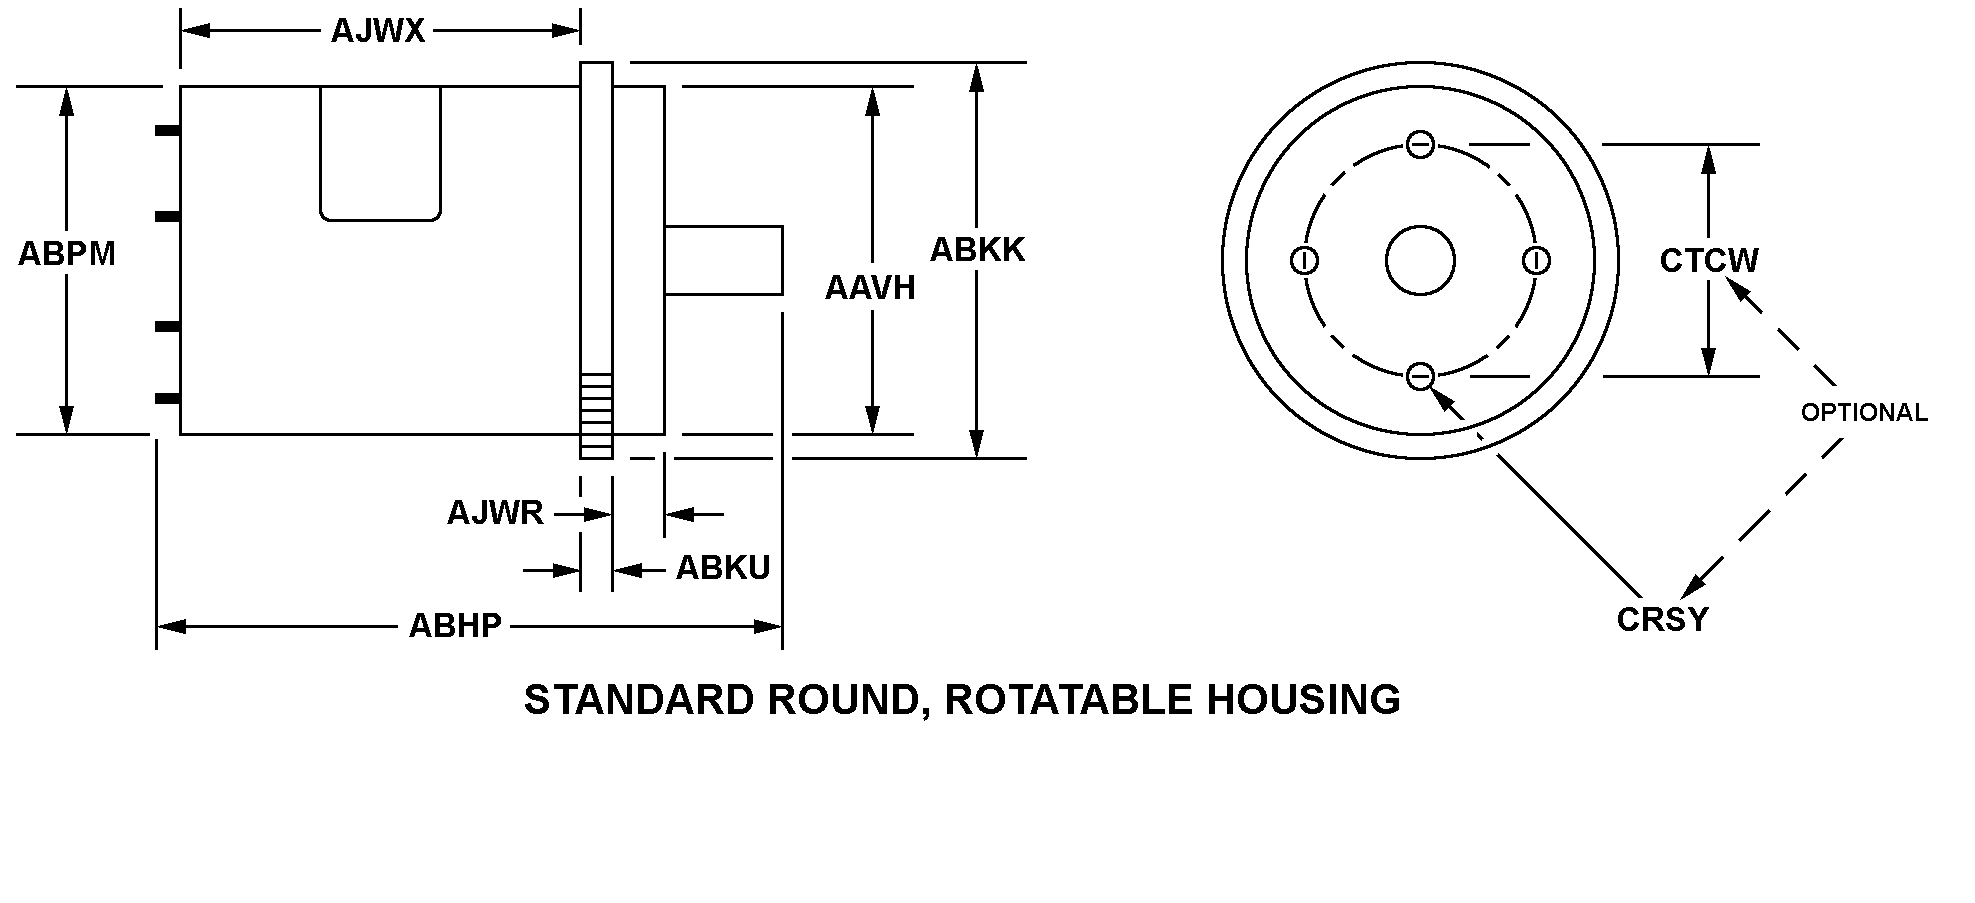 STANDARD ROUND, ROTATABLE HOUSING style nsn 5990-01-264-6512